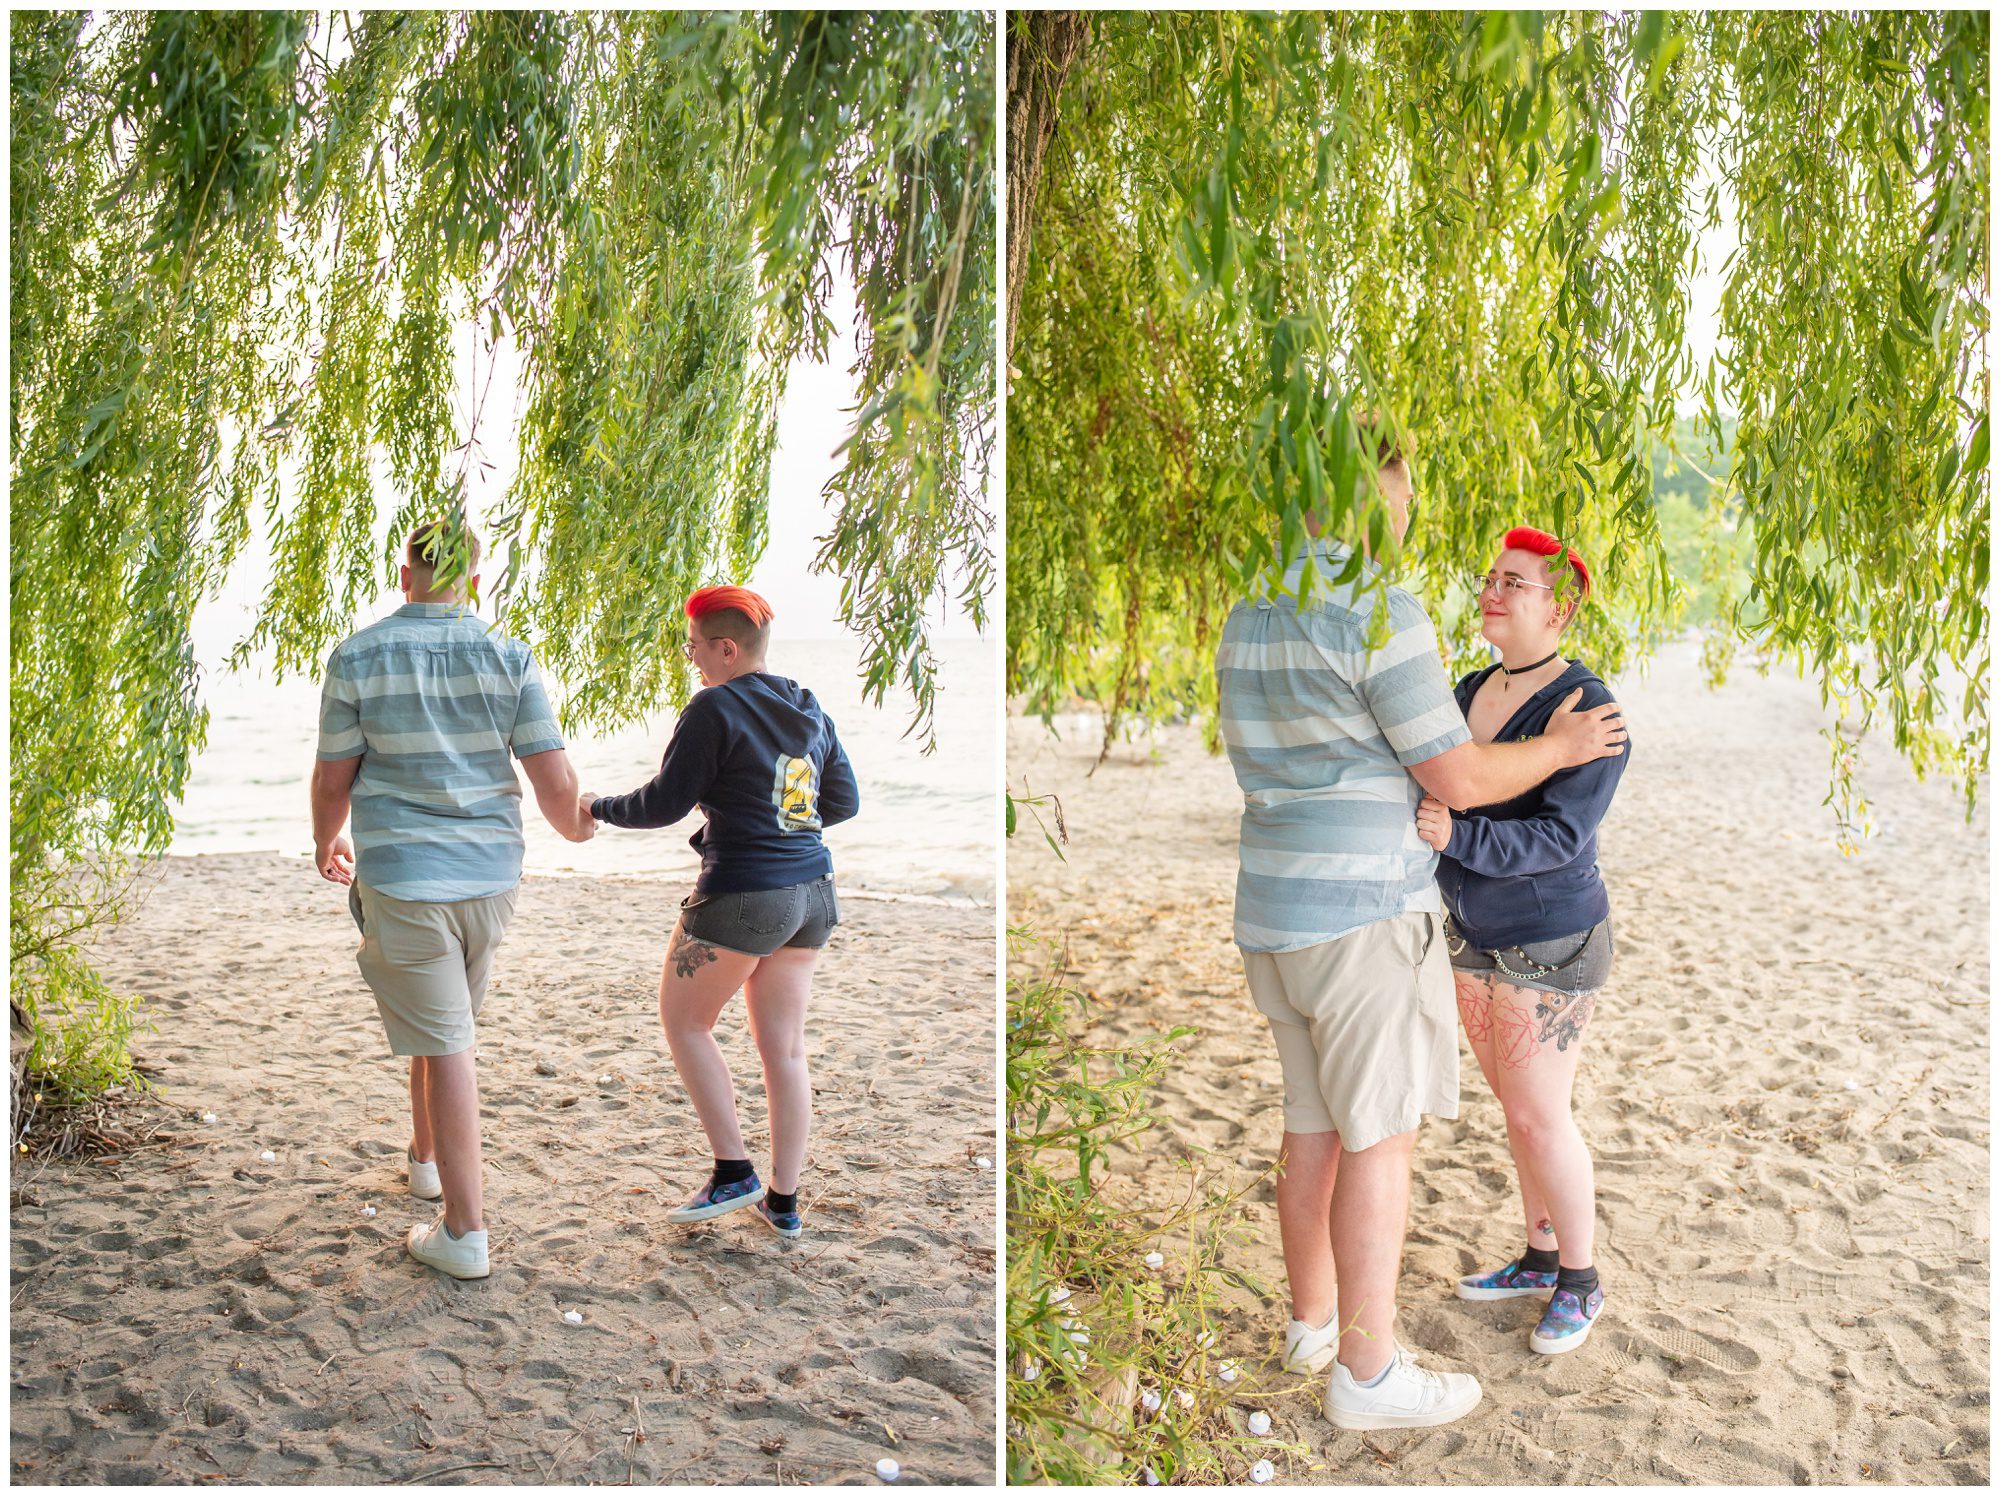 Charles Daley Park, Charles Daley Park Proposal, Southwestern Ontario Engagement Photographer